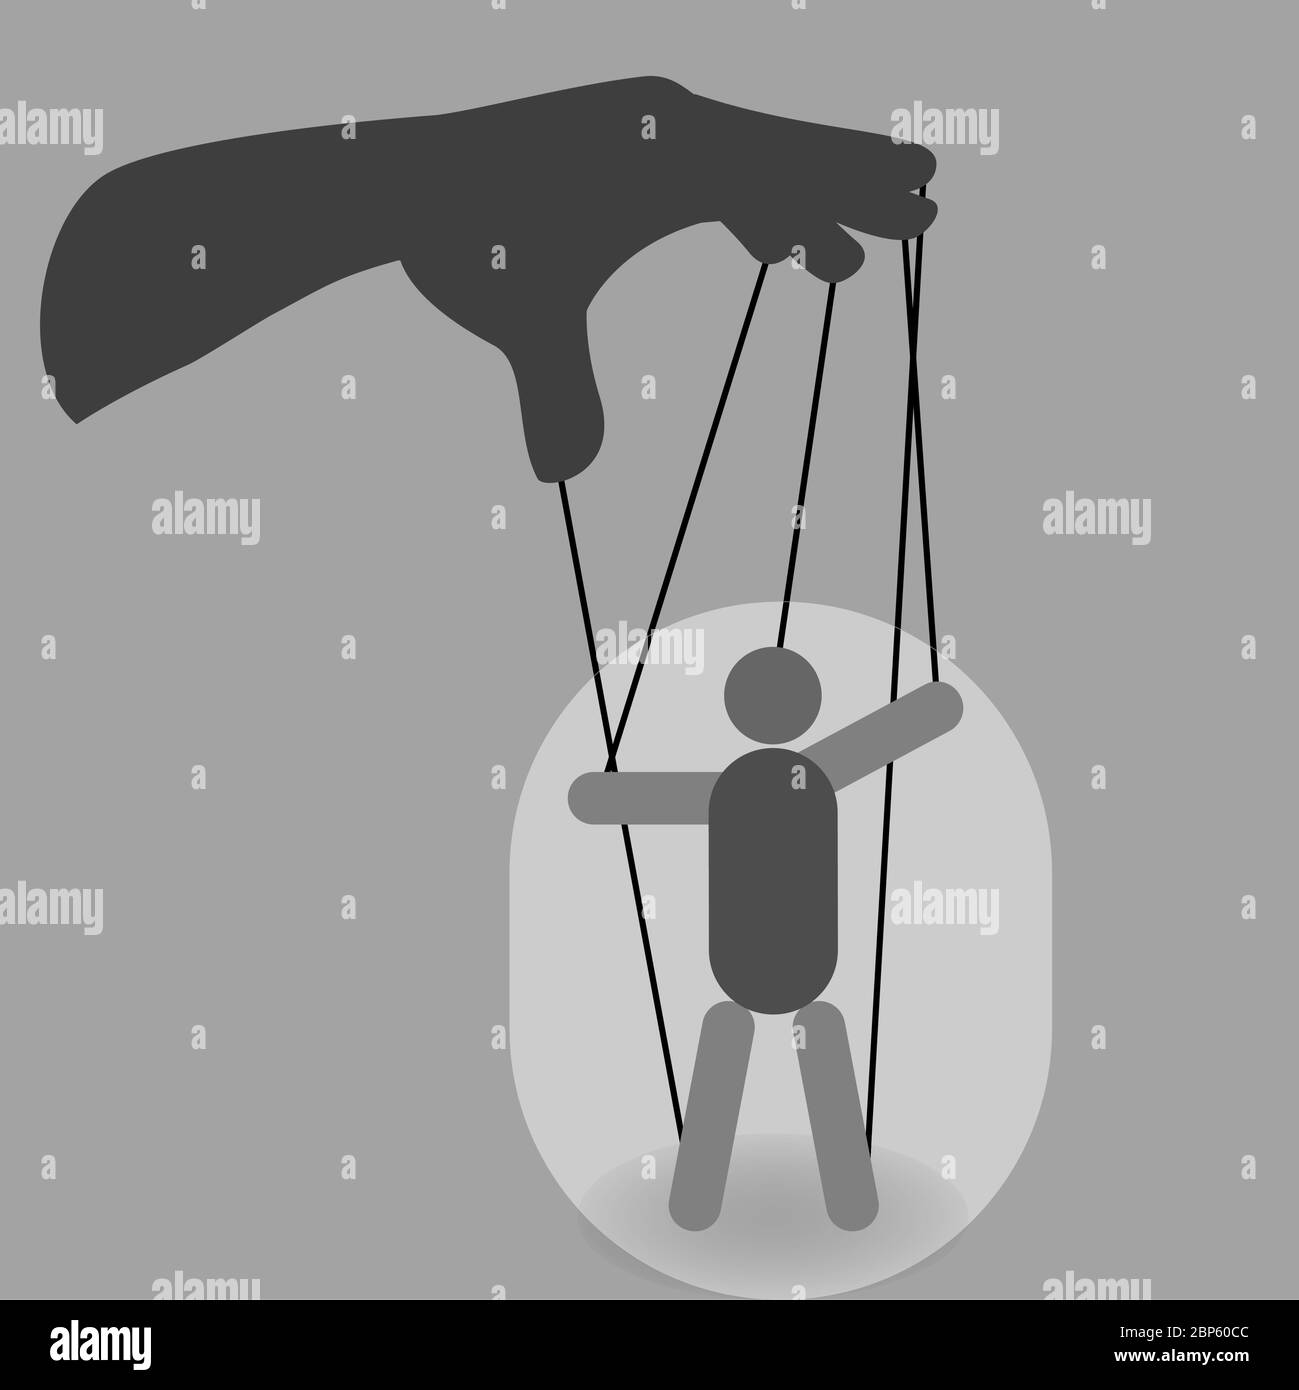 Hand with a puppet on ropes, manipulation concept Stock Vector